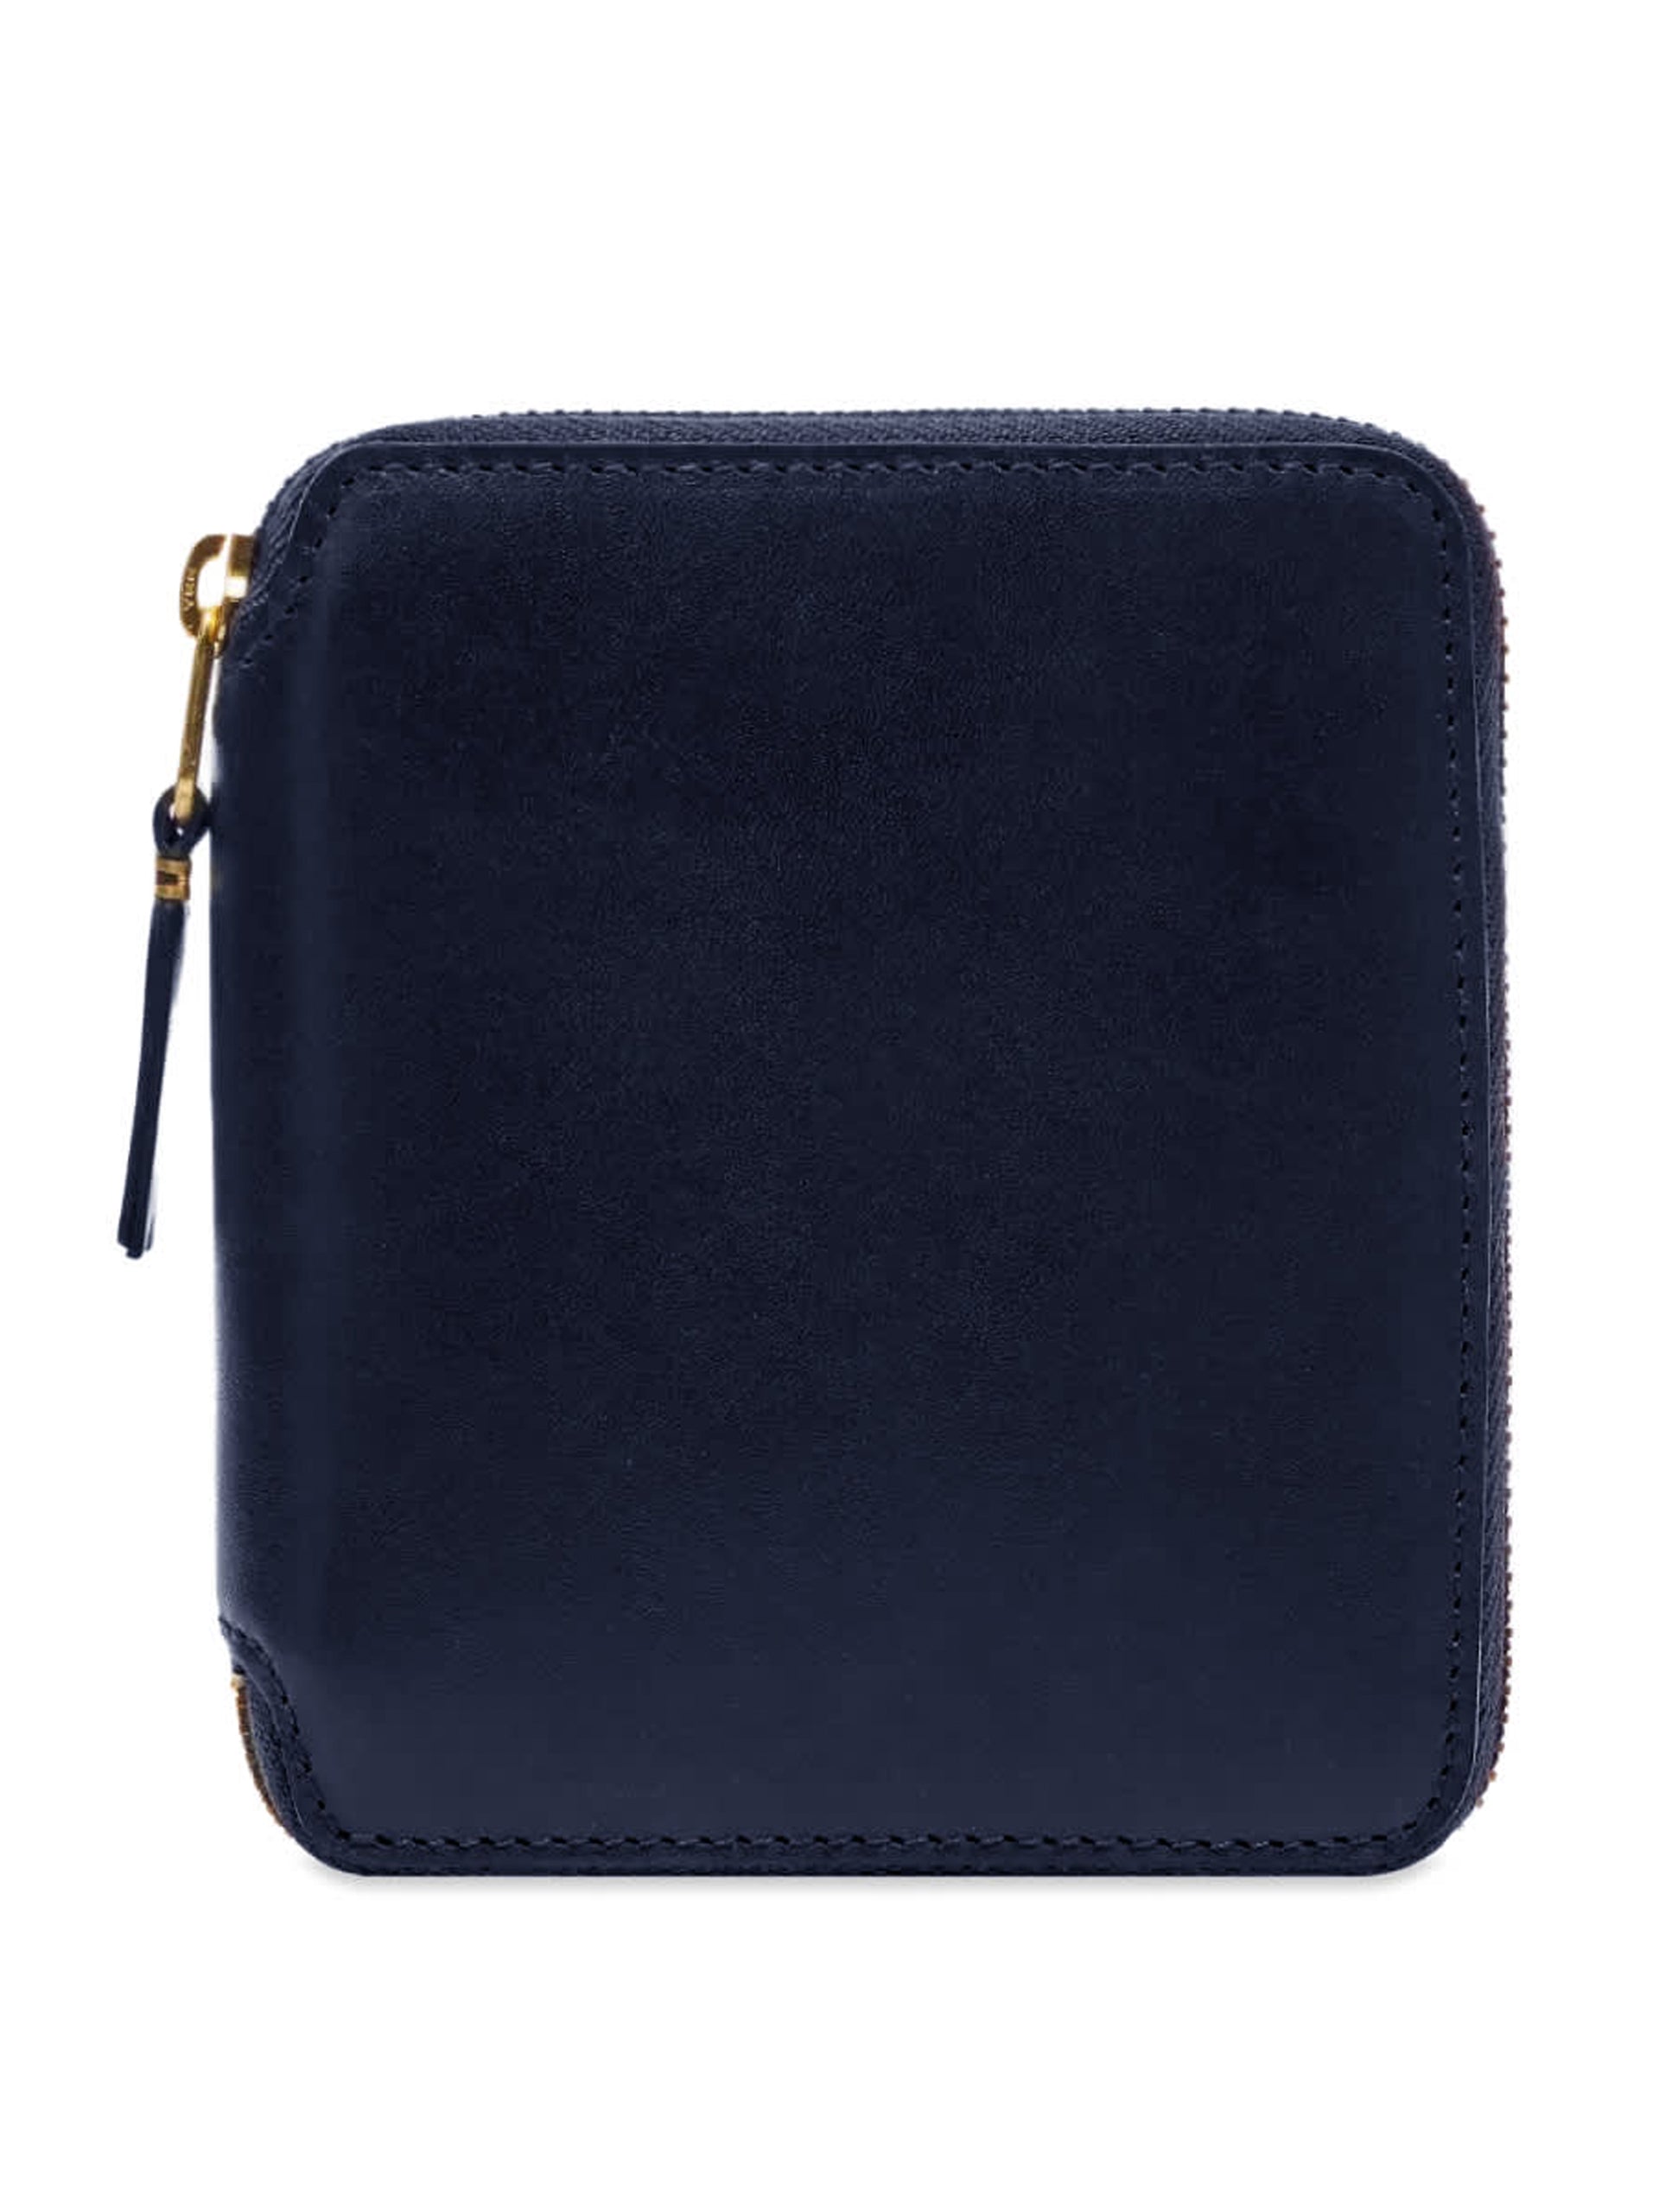 Navy blue wallet - Collagerie